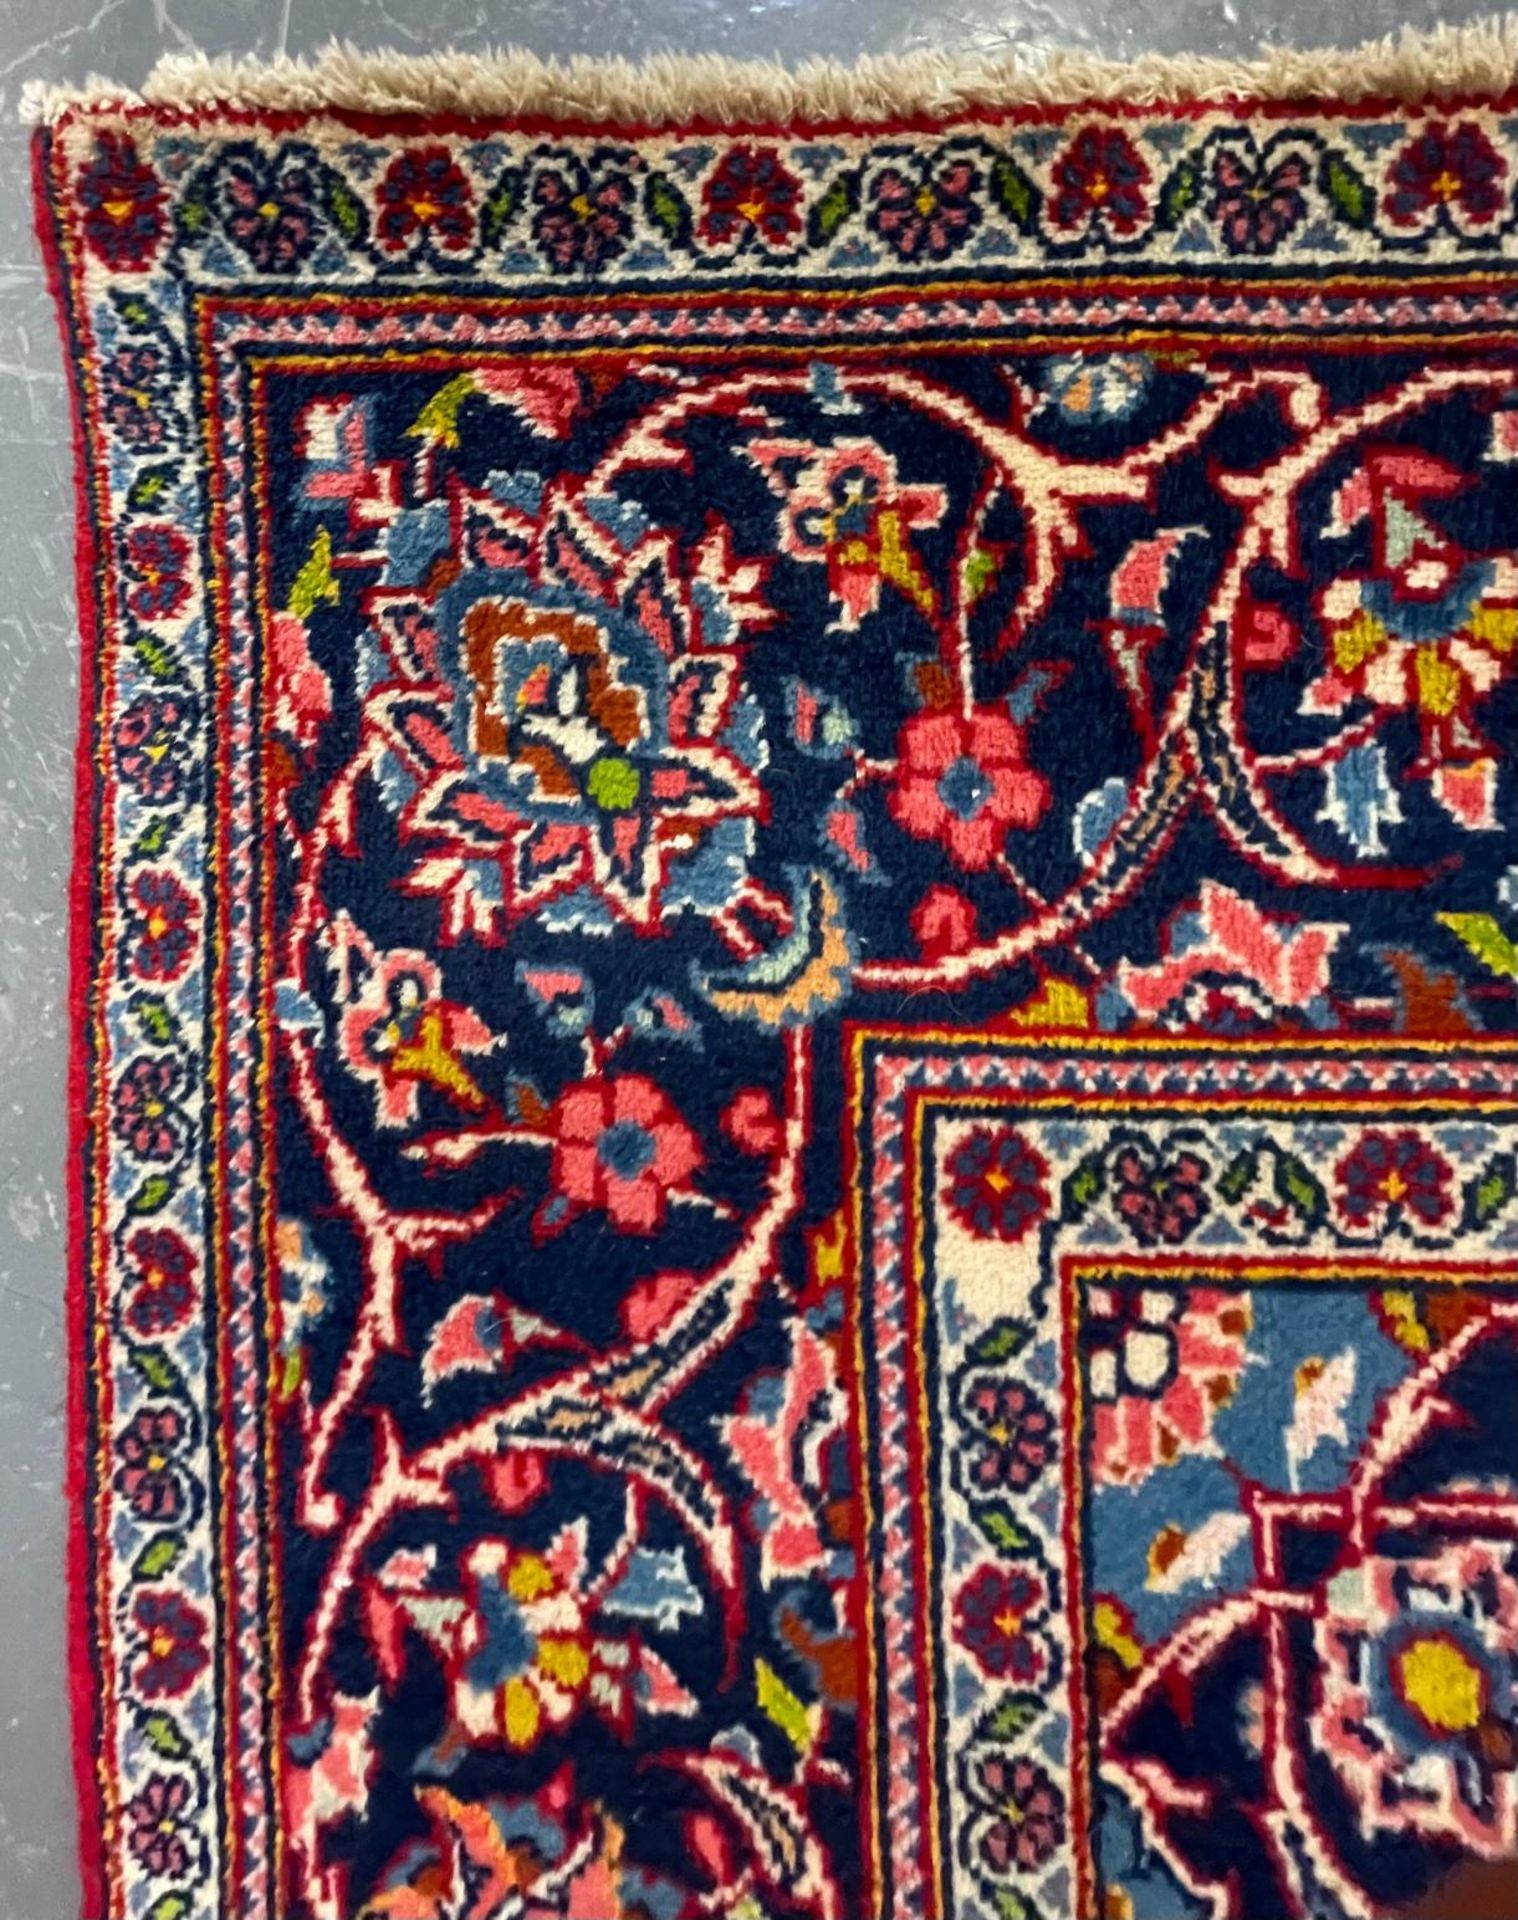 20TH CENTURY CENTRAL PERSIAN KASHAN CARPET RUG - Image 3 of 4